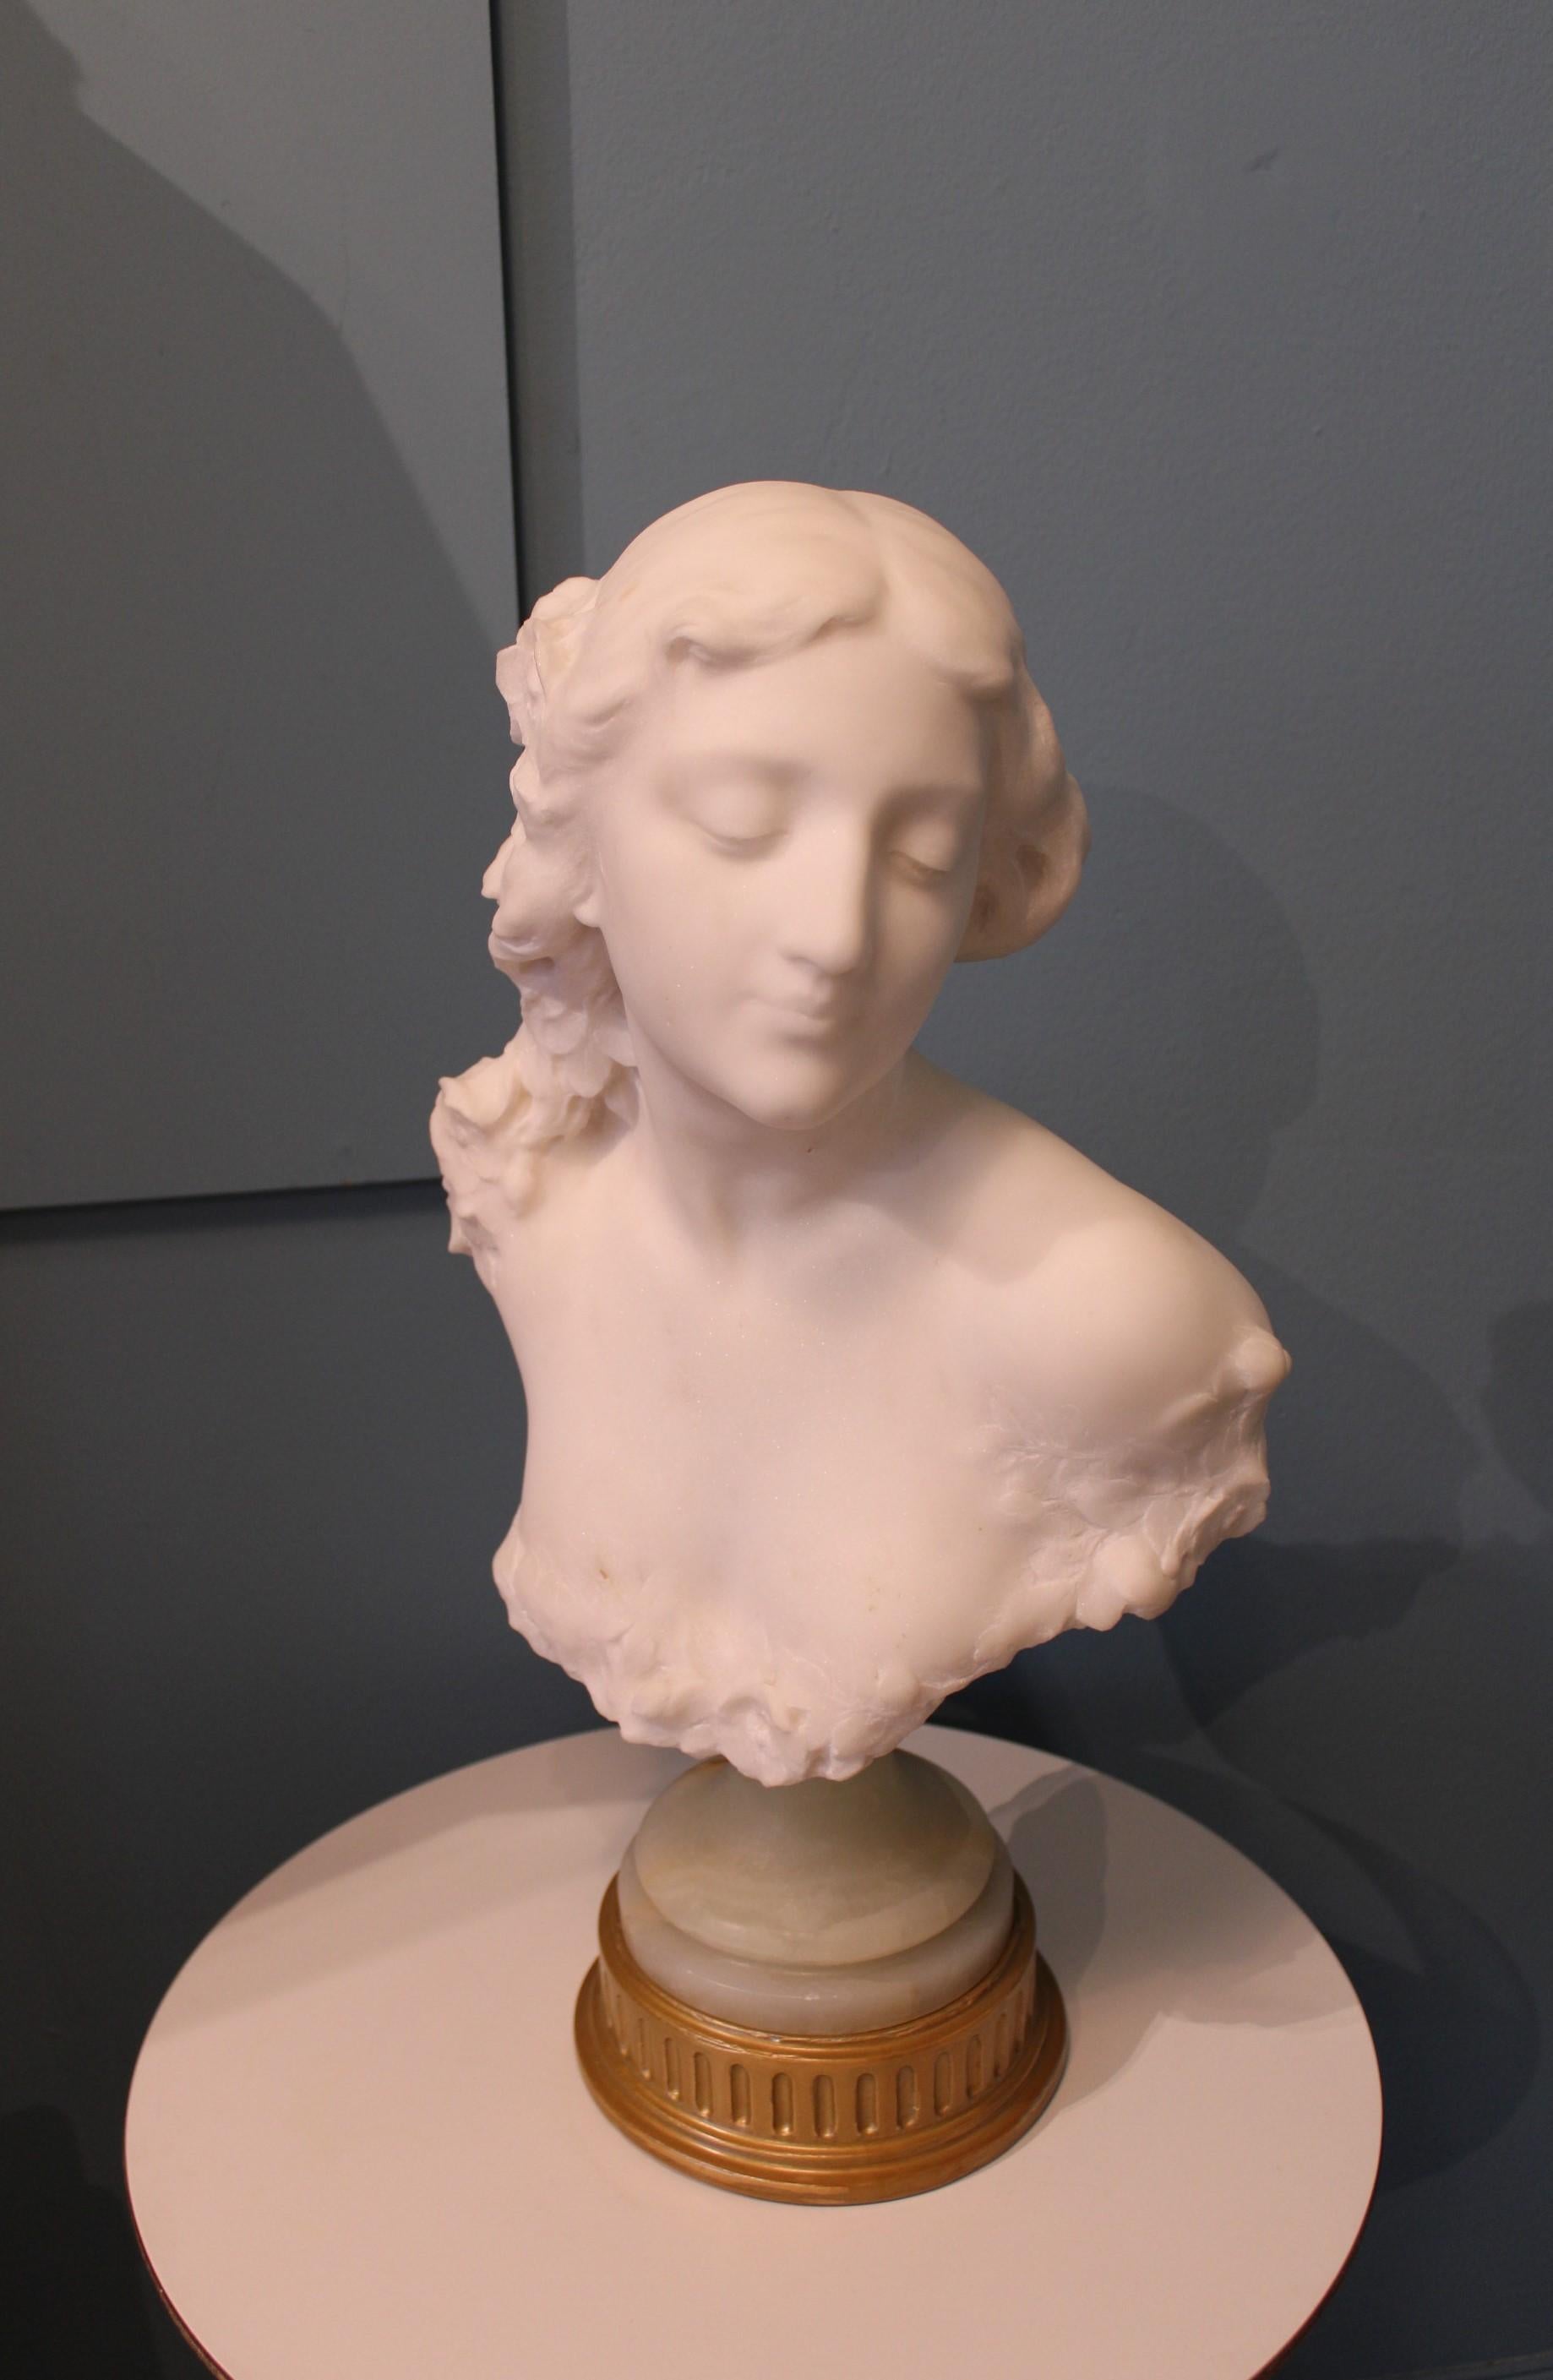 Marble bust signed Bozzoni.
19th Century.